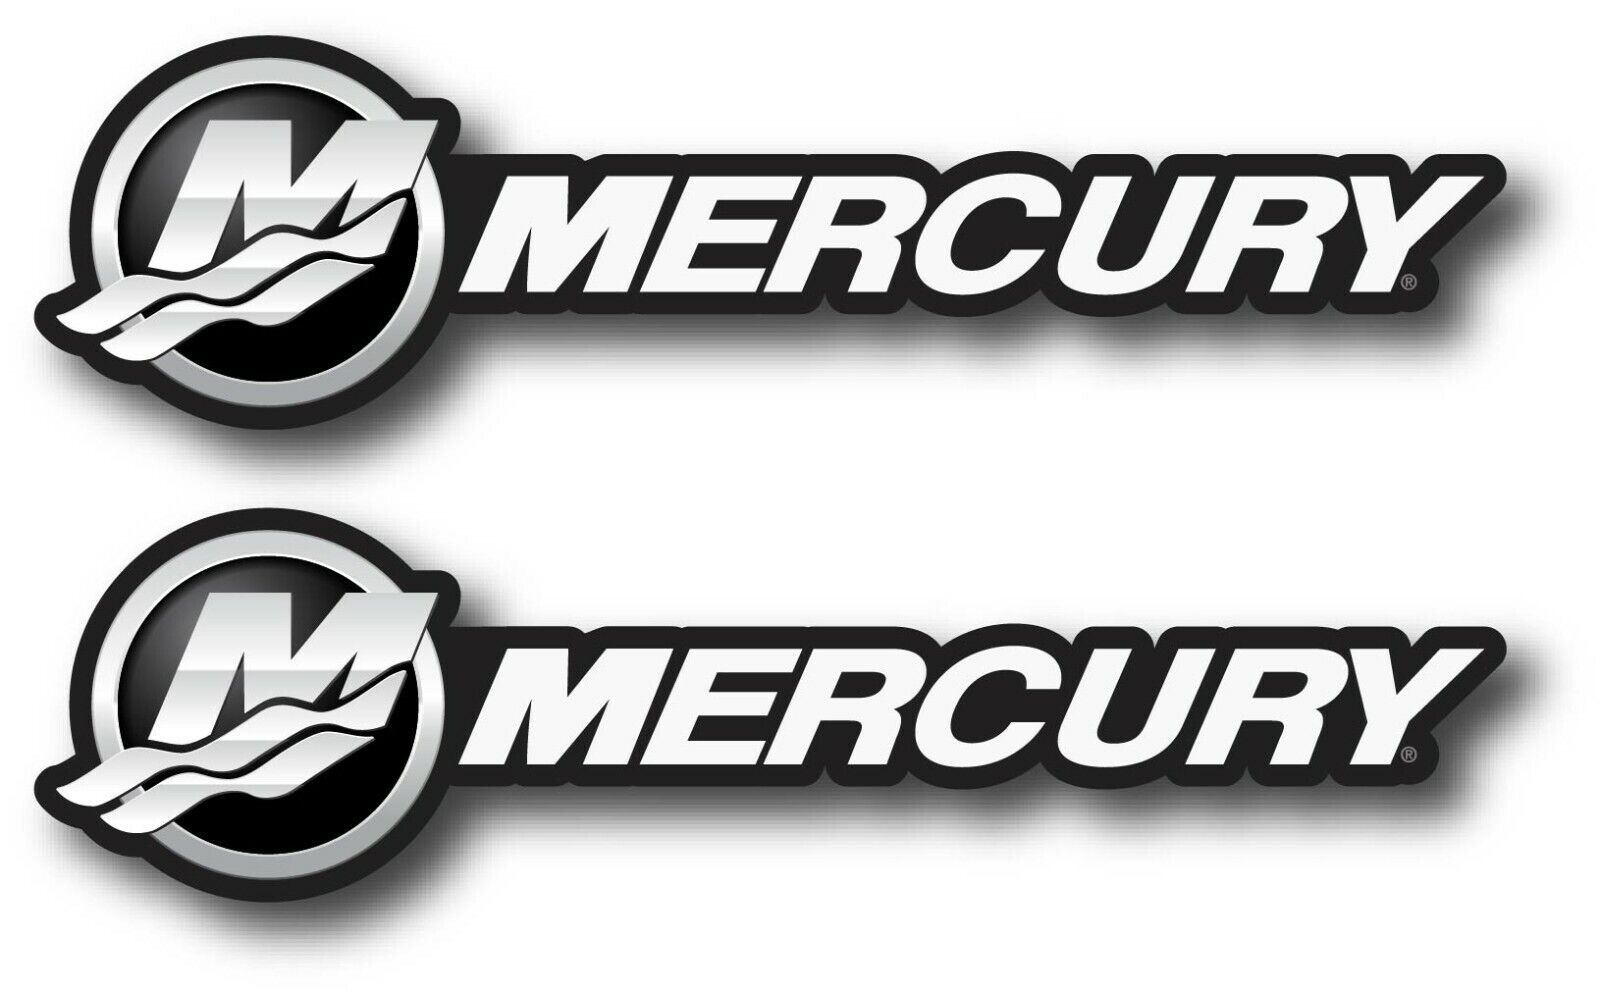 2X MERCURY DECAL STICKER US MADE TRUCK VEHICLE FISHING BOAT OUTBOARD CAR WINDOW